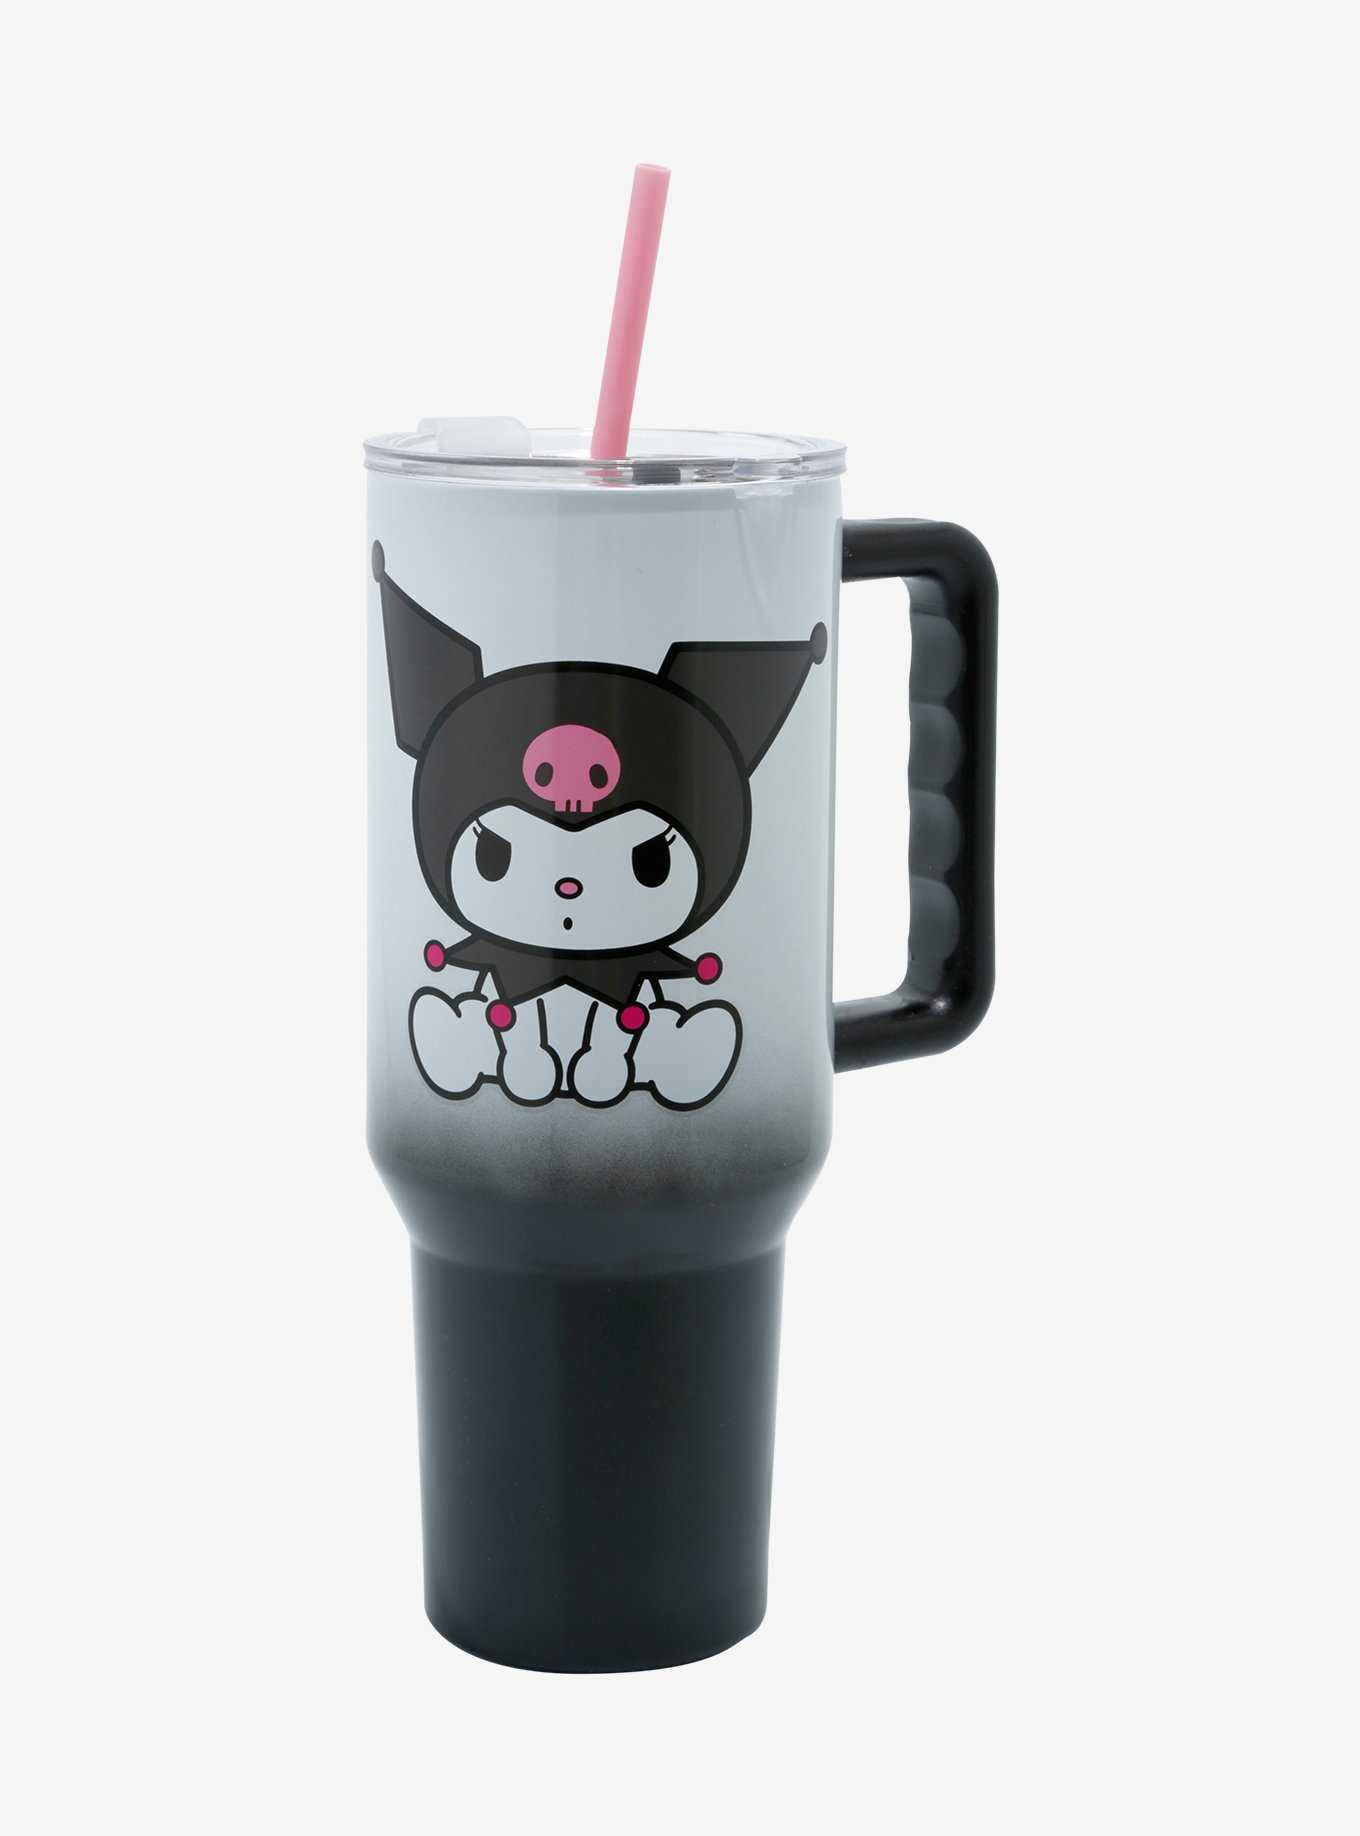 Kuromi Ombre Stainless Steel Travel Cup, , hi-res